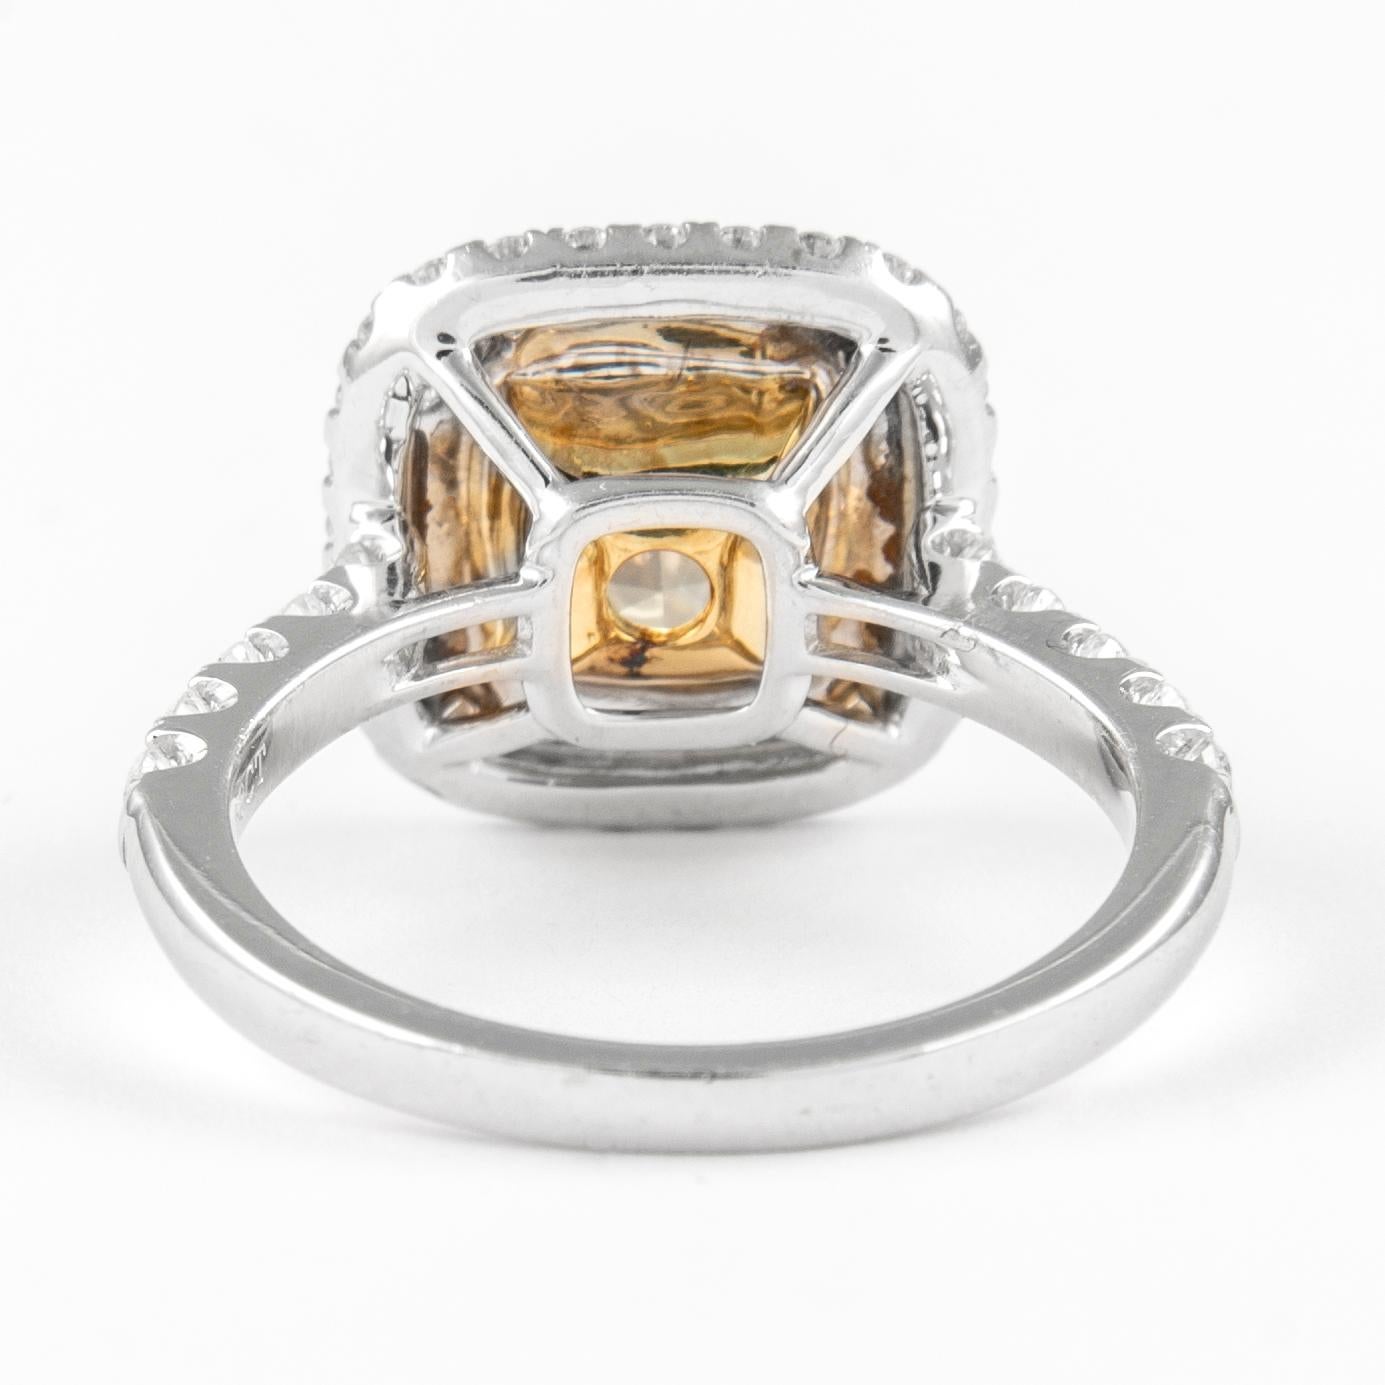 Alexander 2.29ctt Fancy Yellow VS2 Diamond Double Halo Ring 18k Two Tone In New Condition For Sale In BEVERLY HILLS, CA